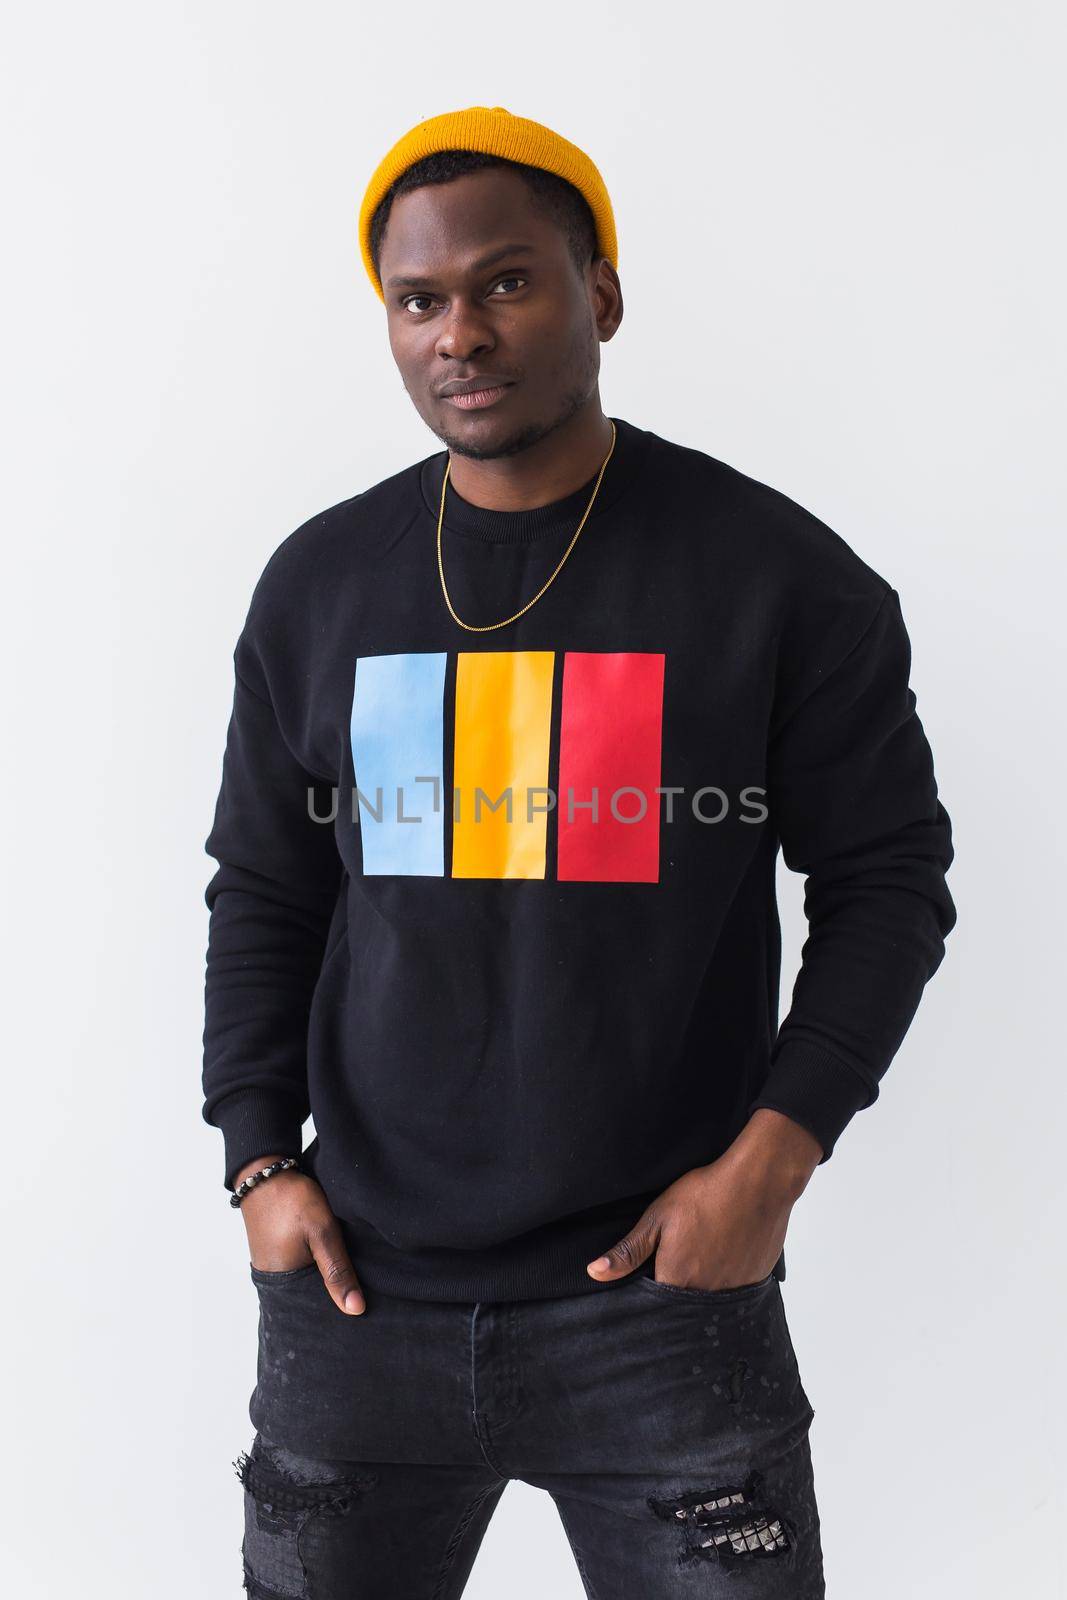 Youth street fashion concept - Portrait of confident sexy black man in stylish sweatshirt on white background. by Satura86